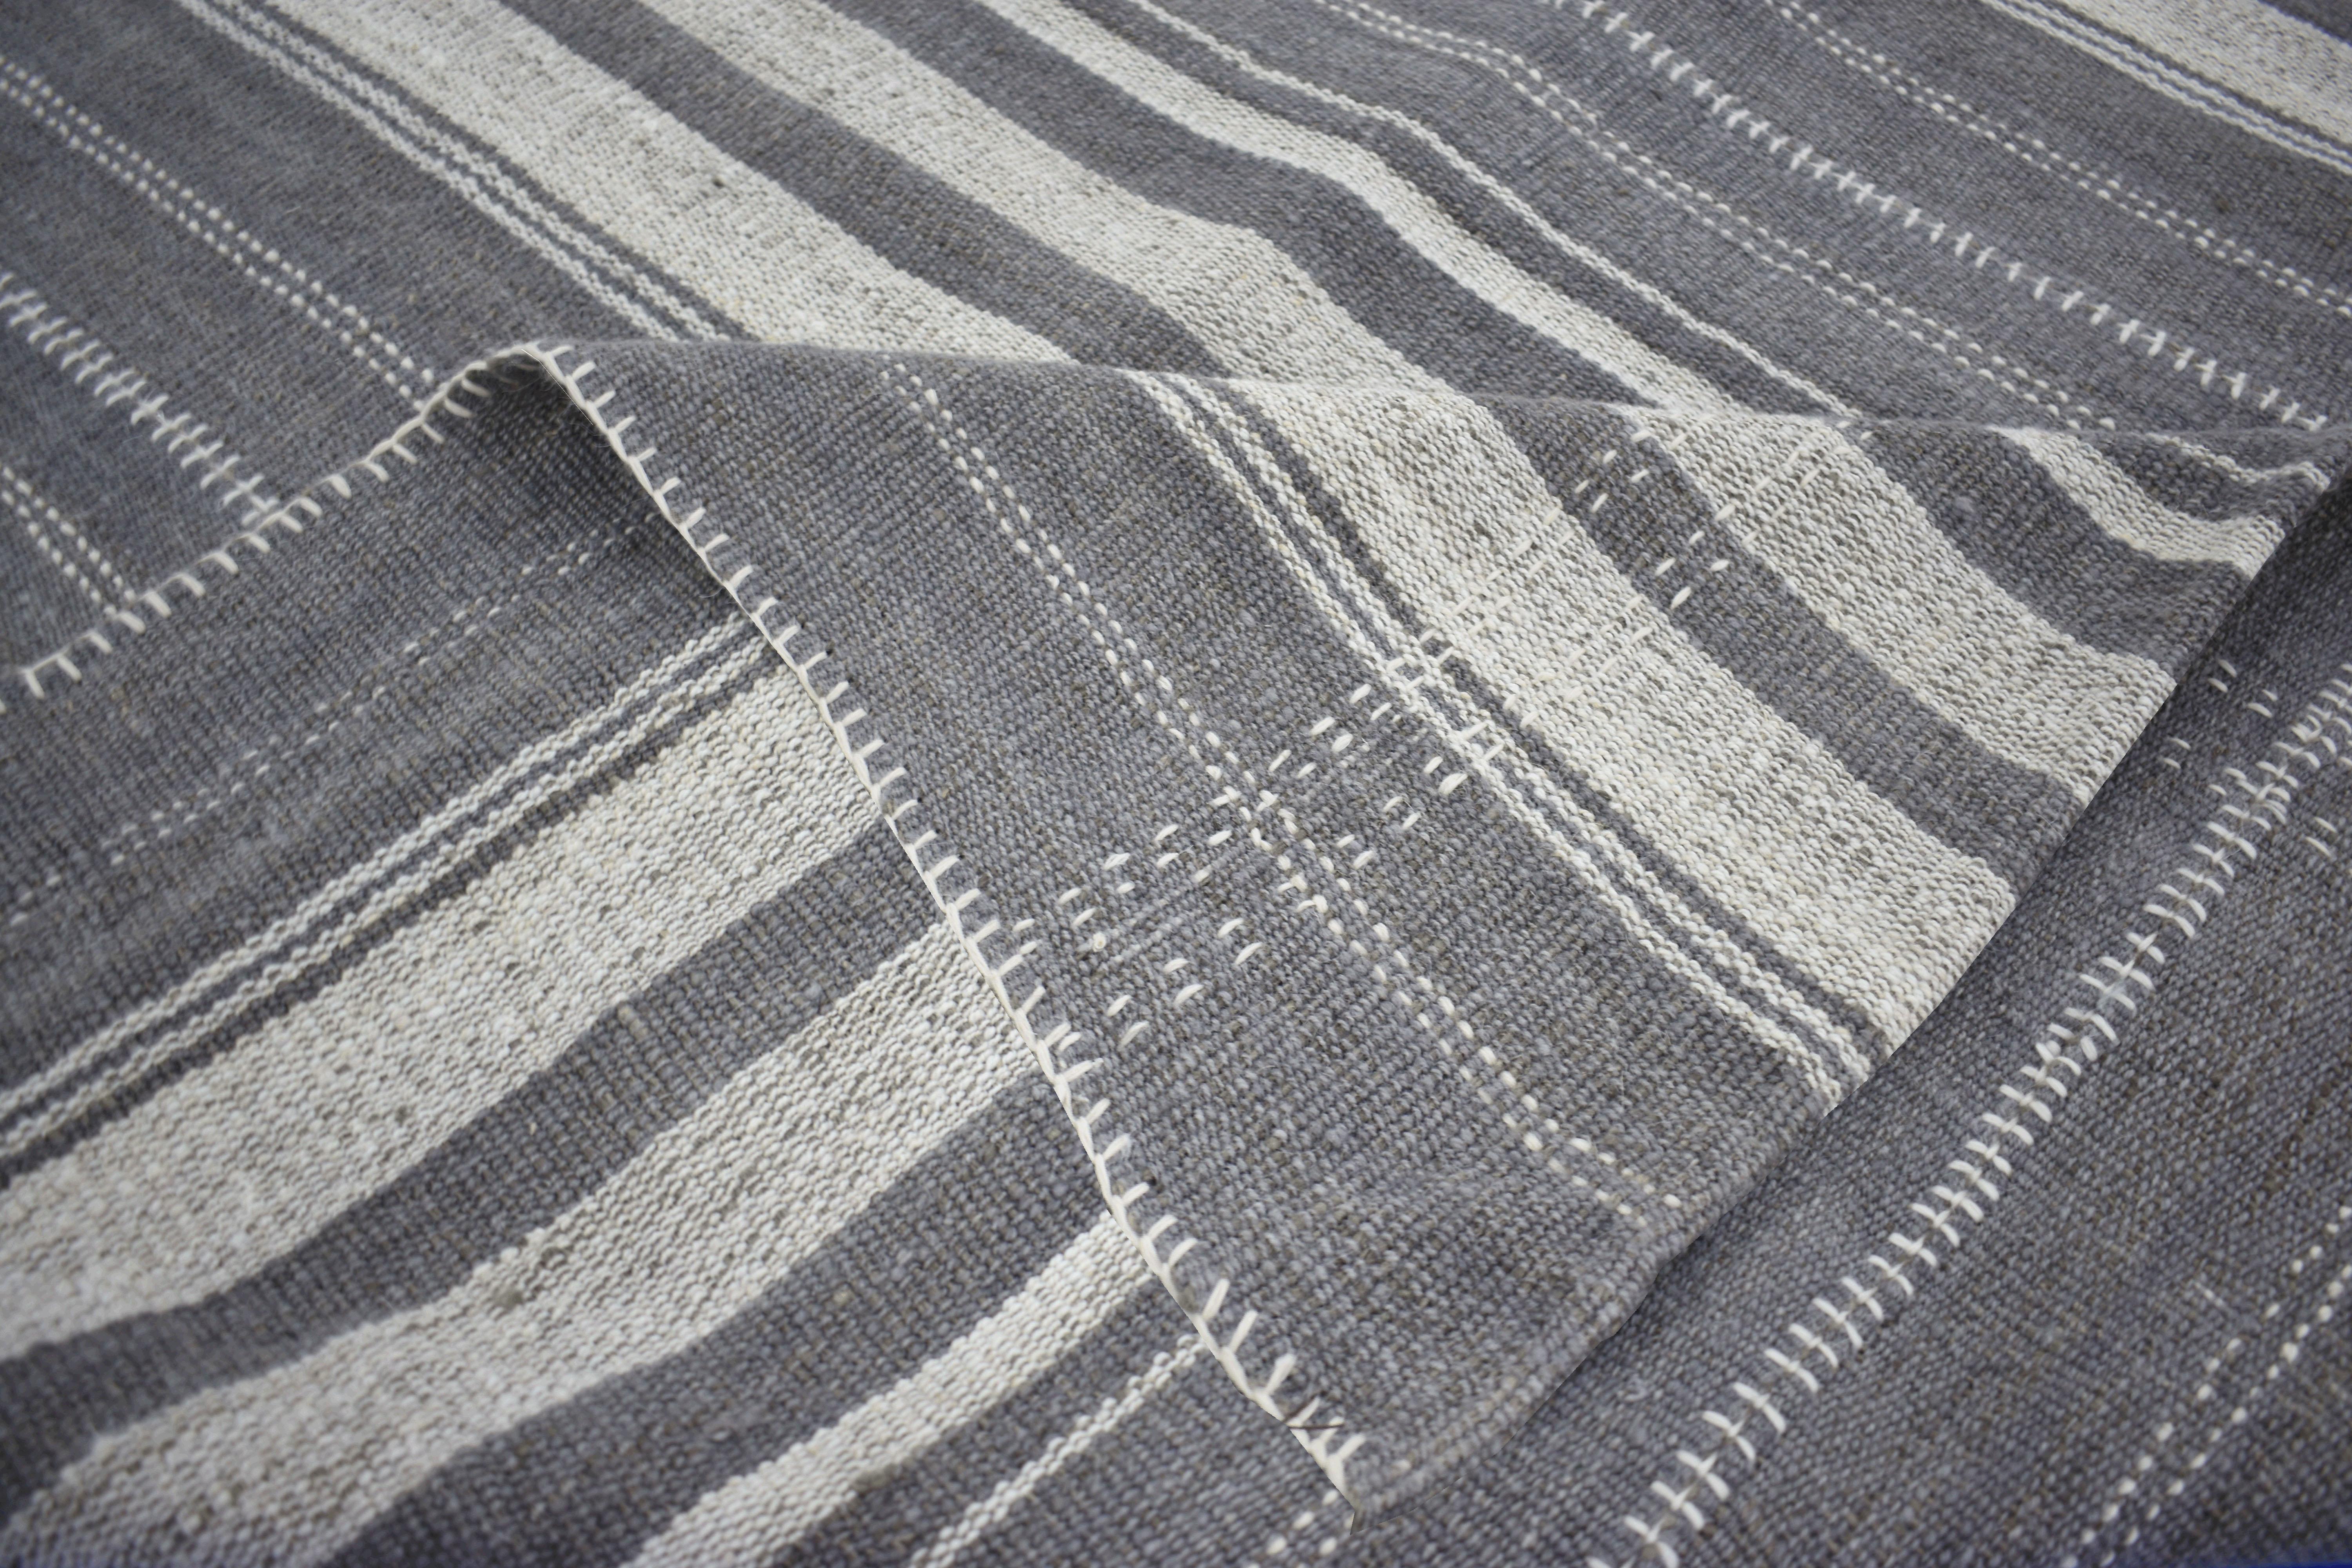 A new production Turkish rug handwoven from the finest sheep’s wool and colored with all-natural vegetable dyes that are safe for humans and pets. It’s a traditional Kilim flat-weave design featuring a lovely ivory field with gray and white stripes.